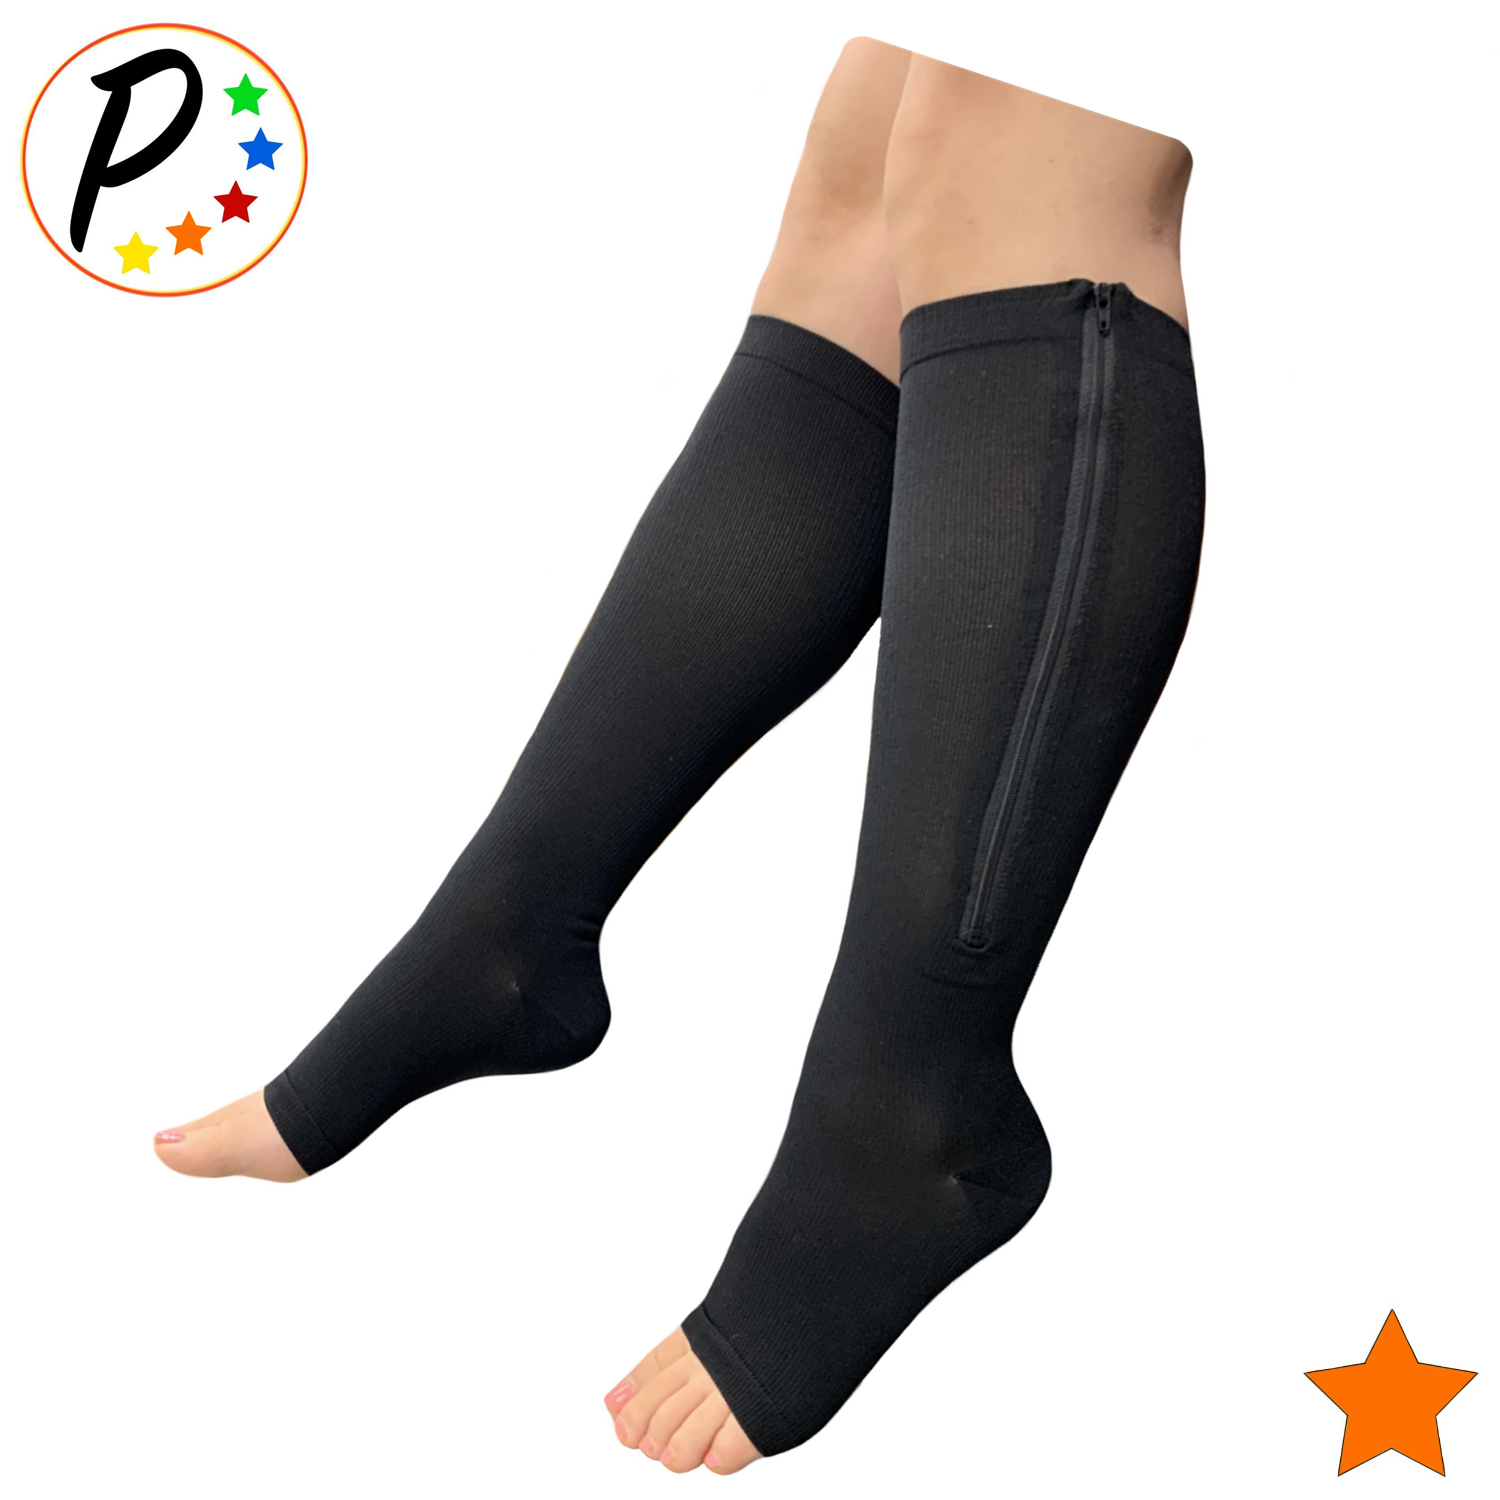 Zipper Pressure Compression Support Socks - Open Toe - Knee High -  20-30mmHg - 2 Pairs only $12.95